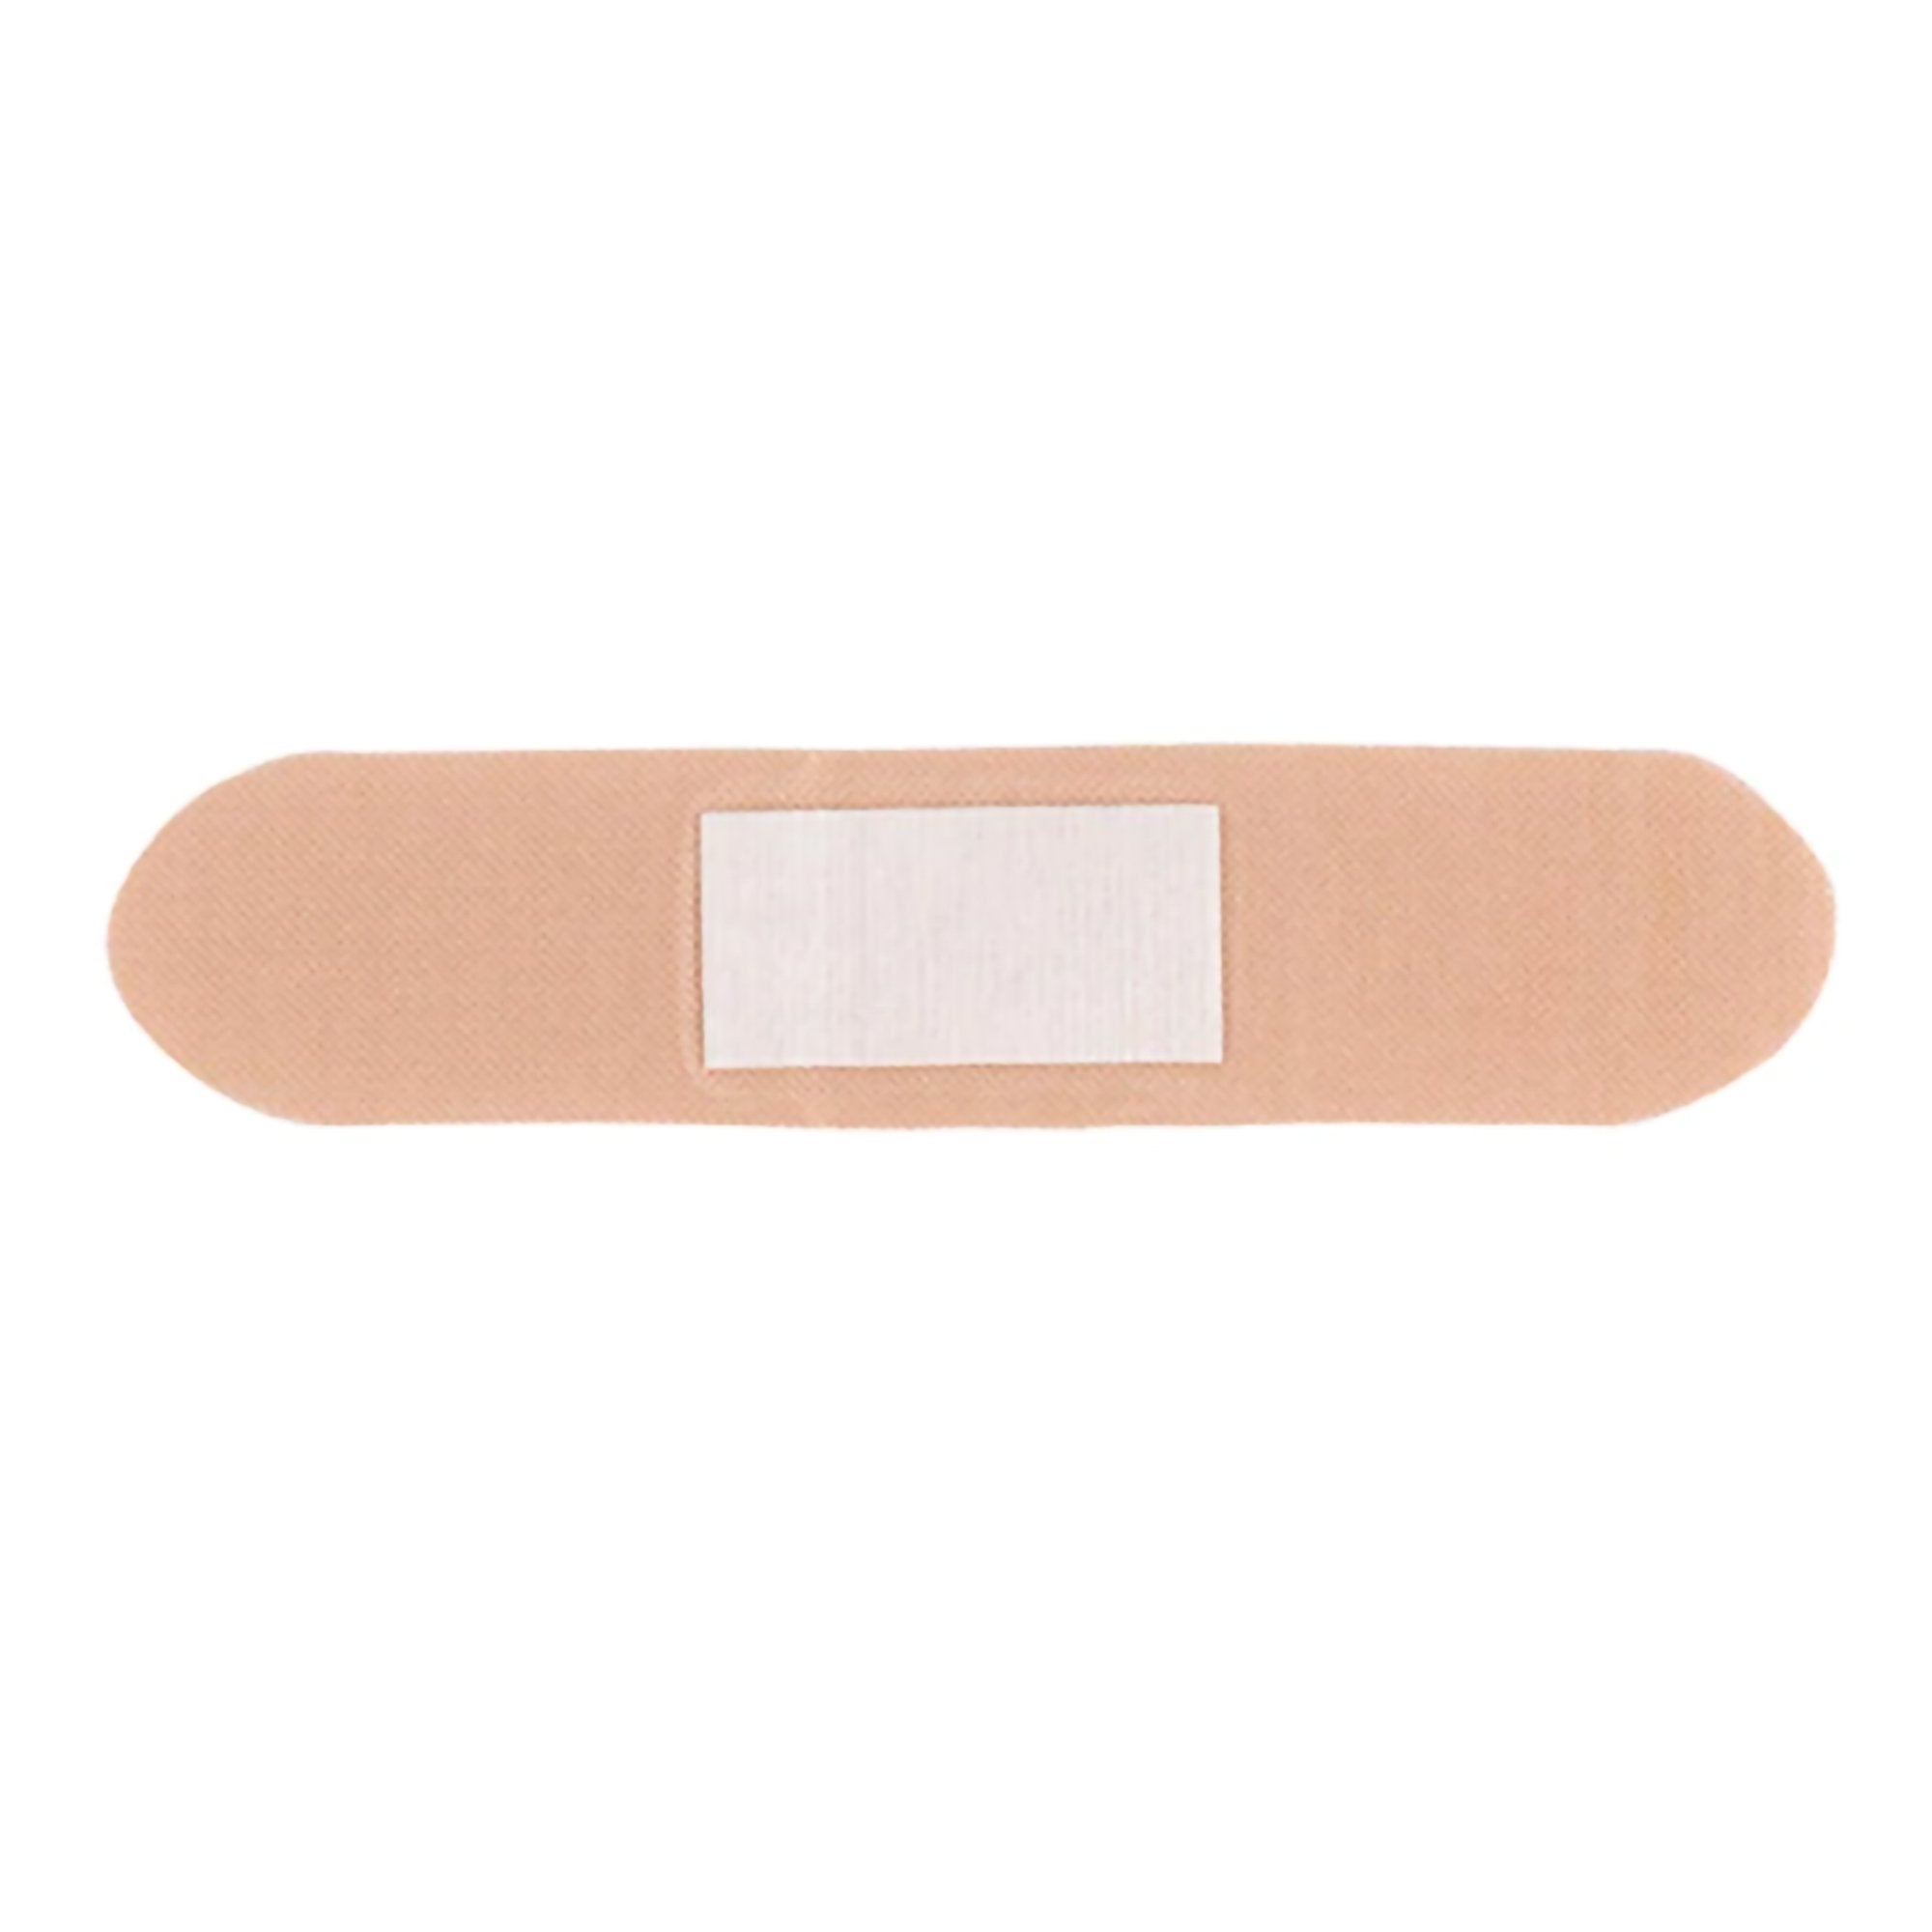 Adhesive Strip Patch™ 3/4 X 3 Inch Bamboo Rectangle Tan Sterile